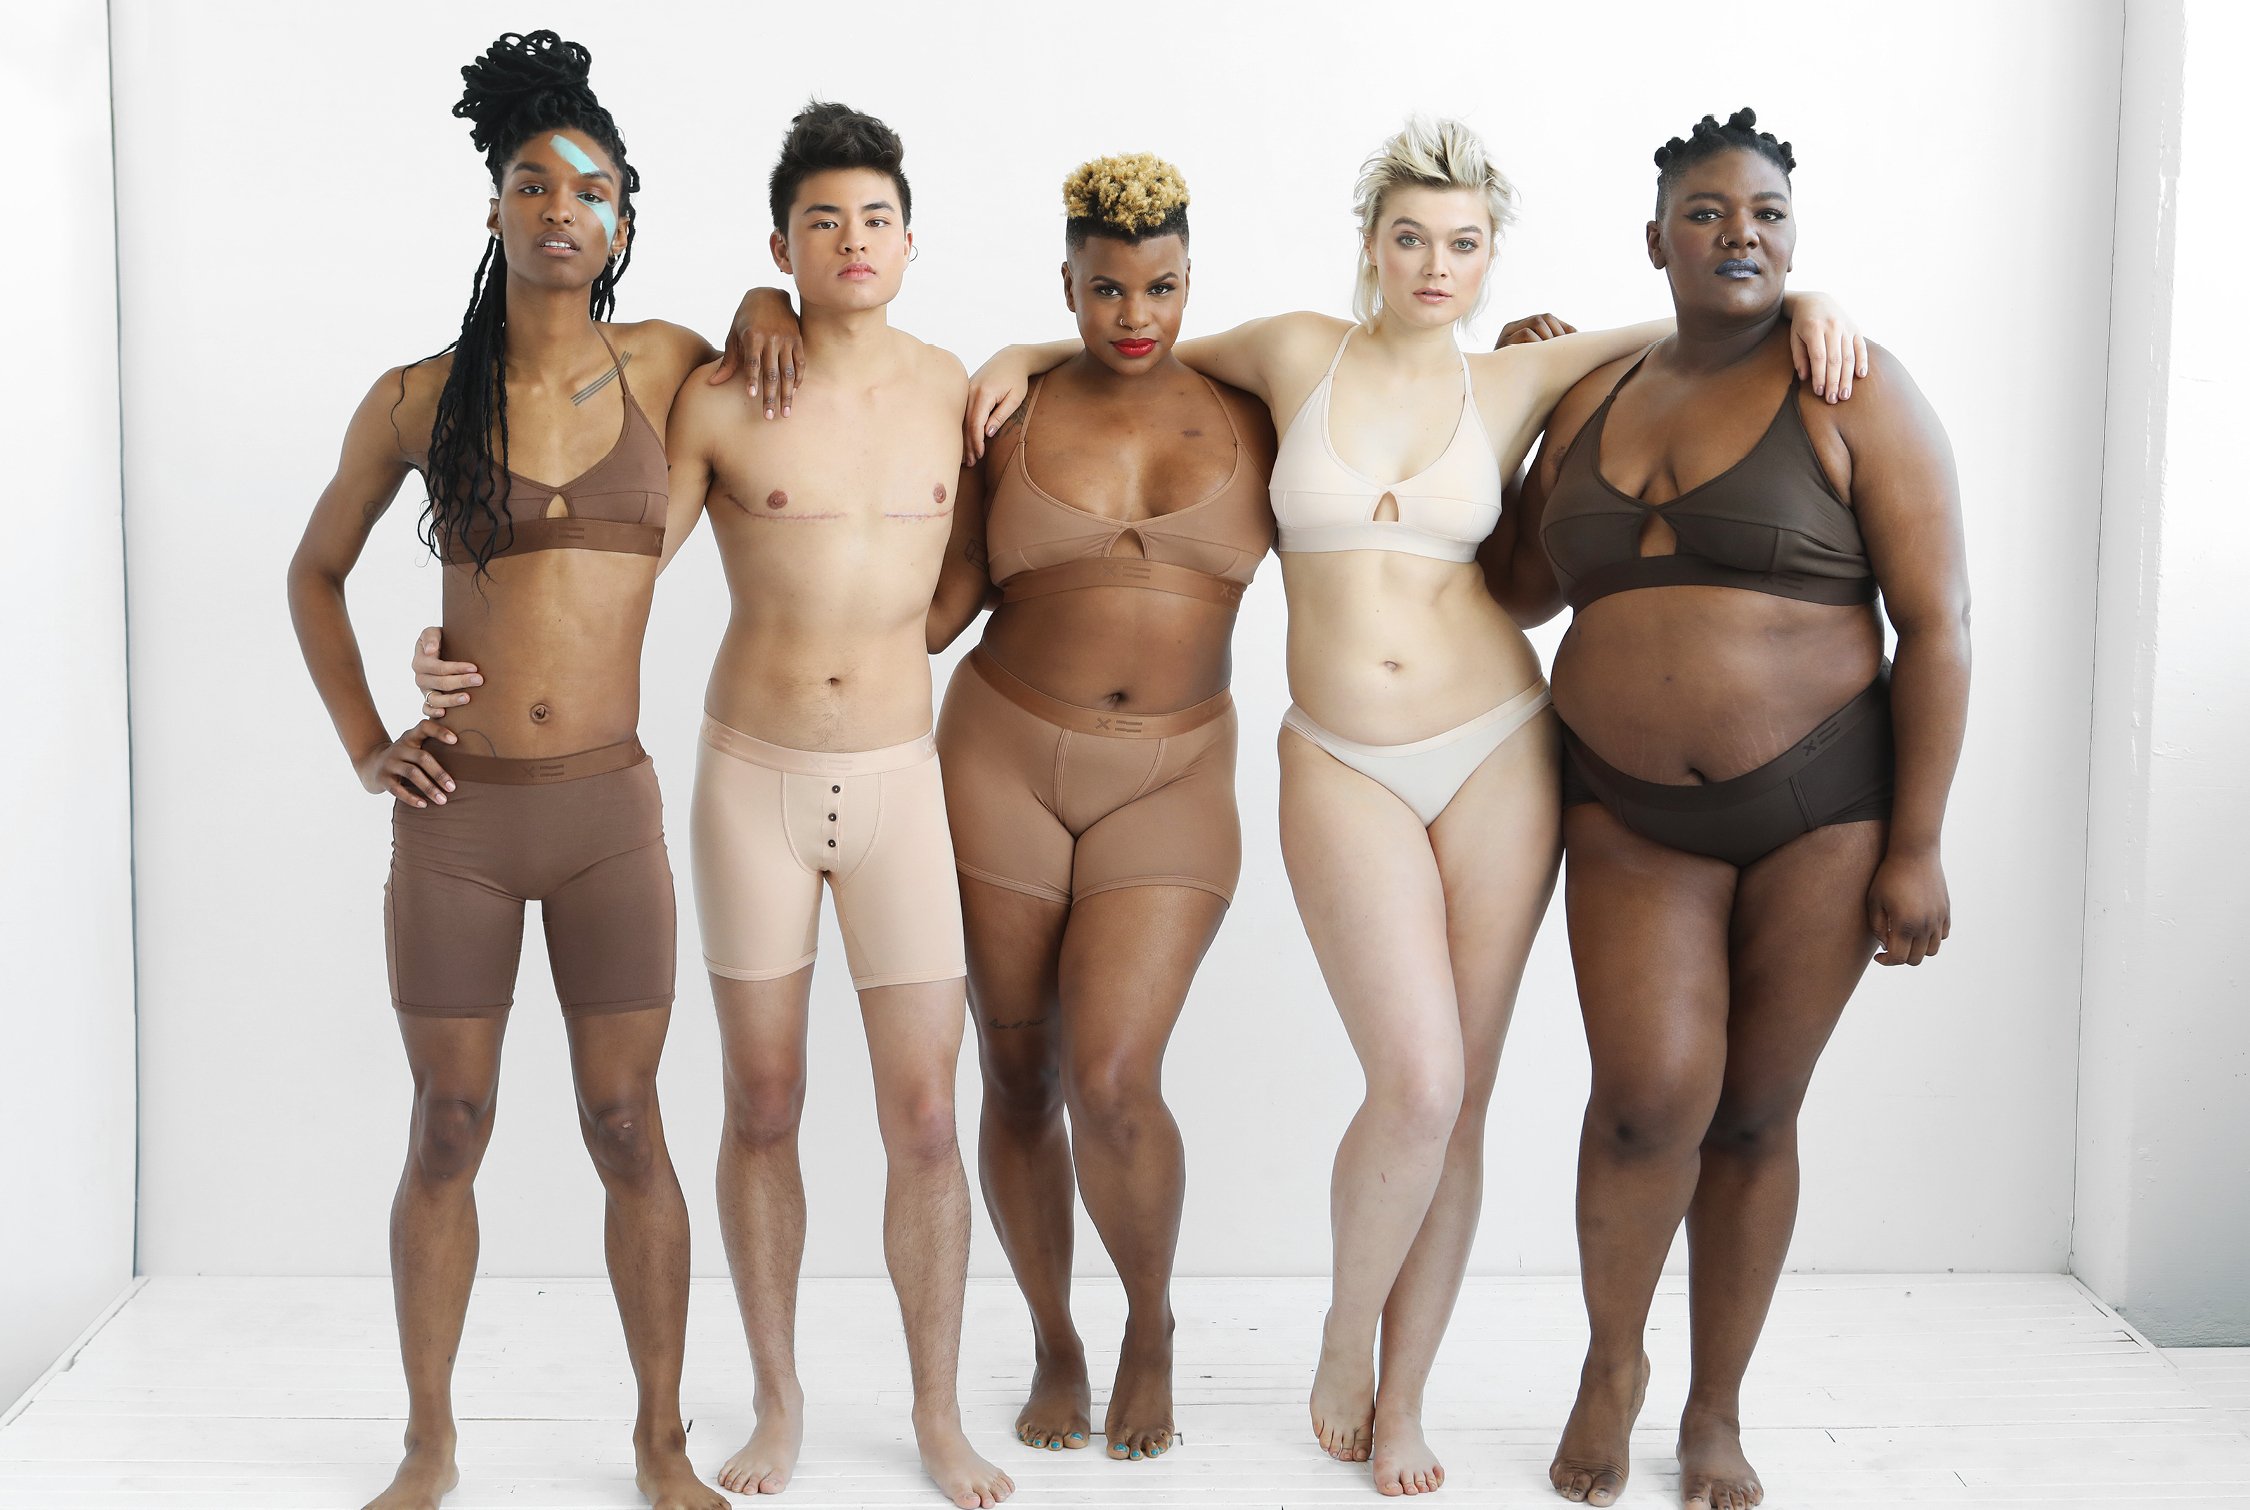 Tomboy X - Nudes Collection